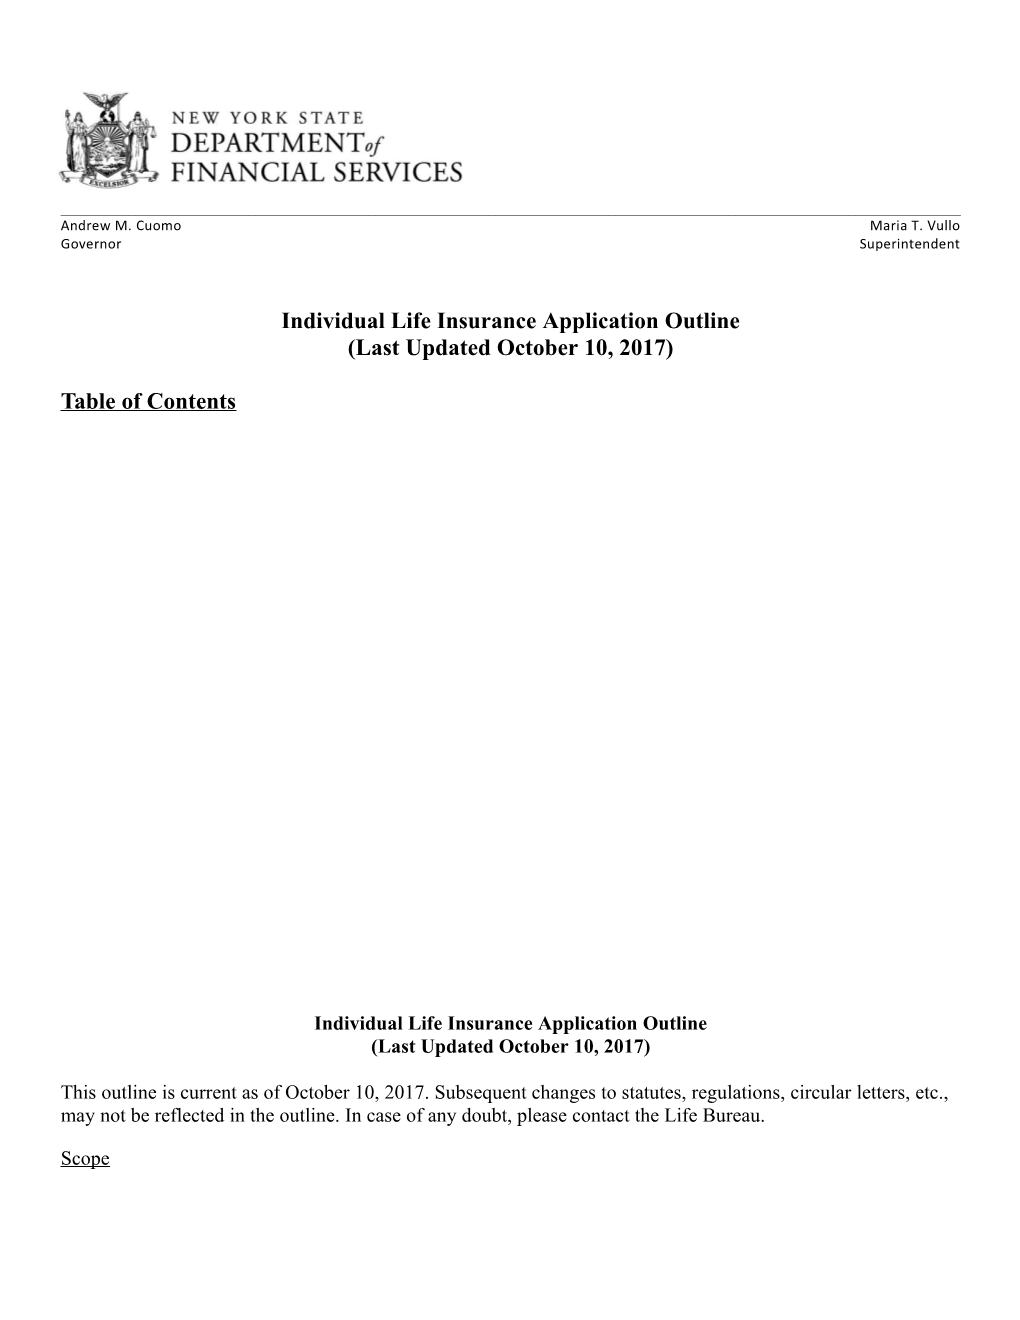 New York State Department of Financial Services Individual Life Insurance Application Outline